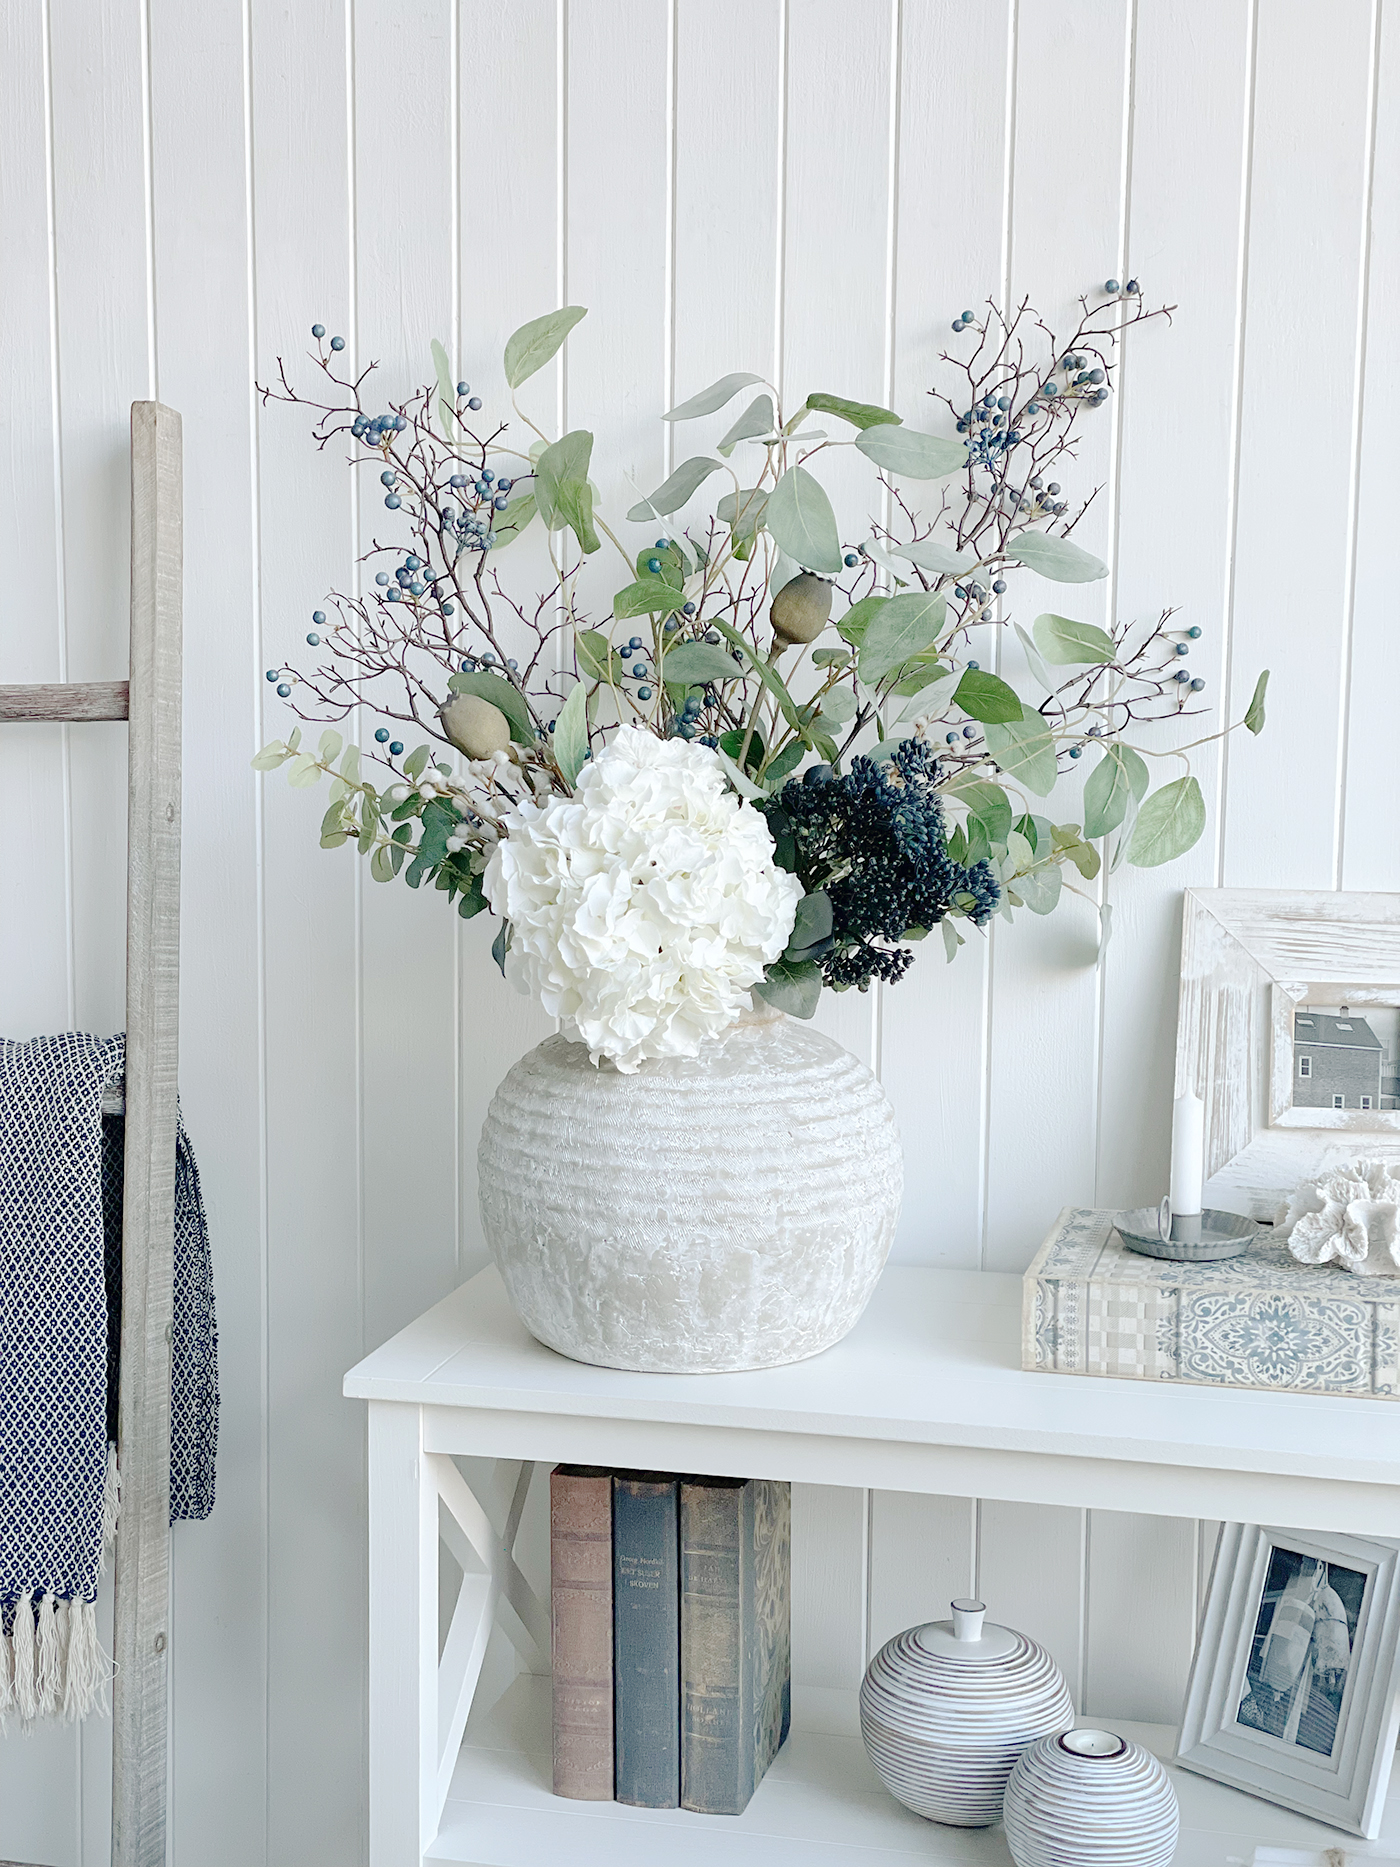 Newfave stone vase with a faux bouquet of Eucalyptus, Poppies, white Hydrangea and blue berries